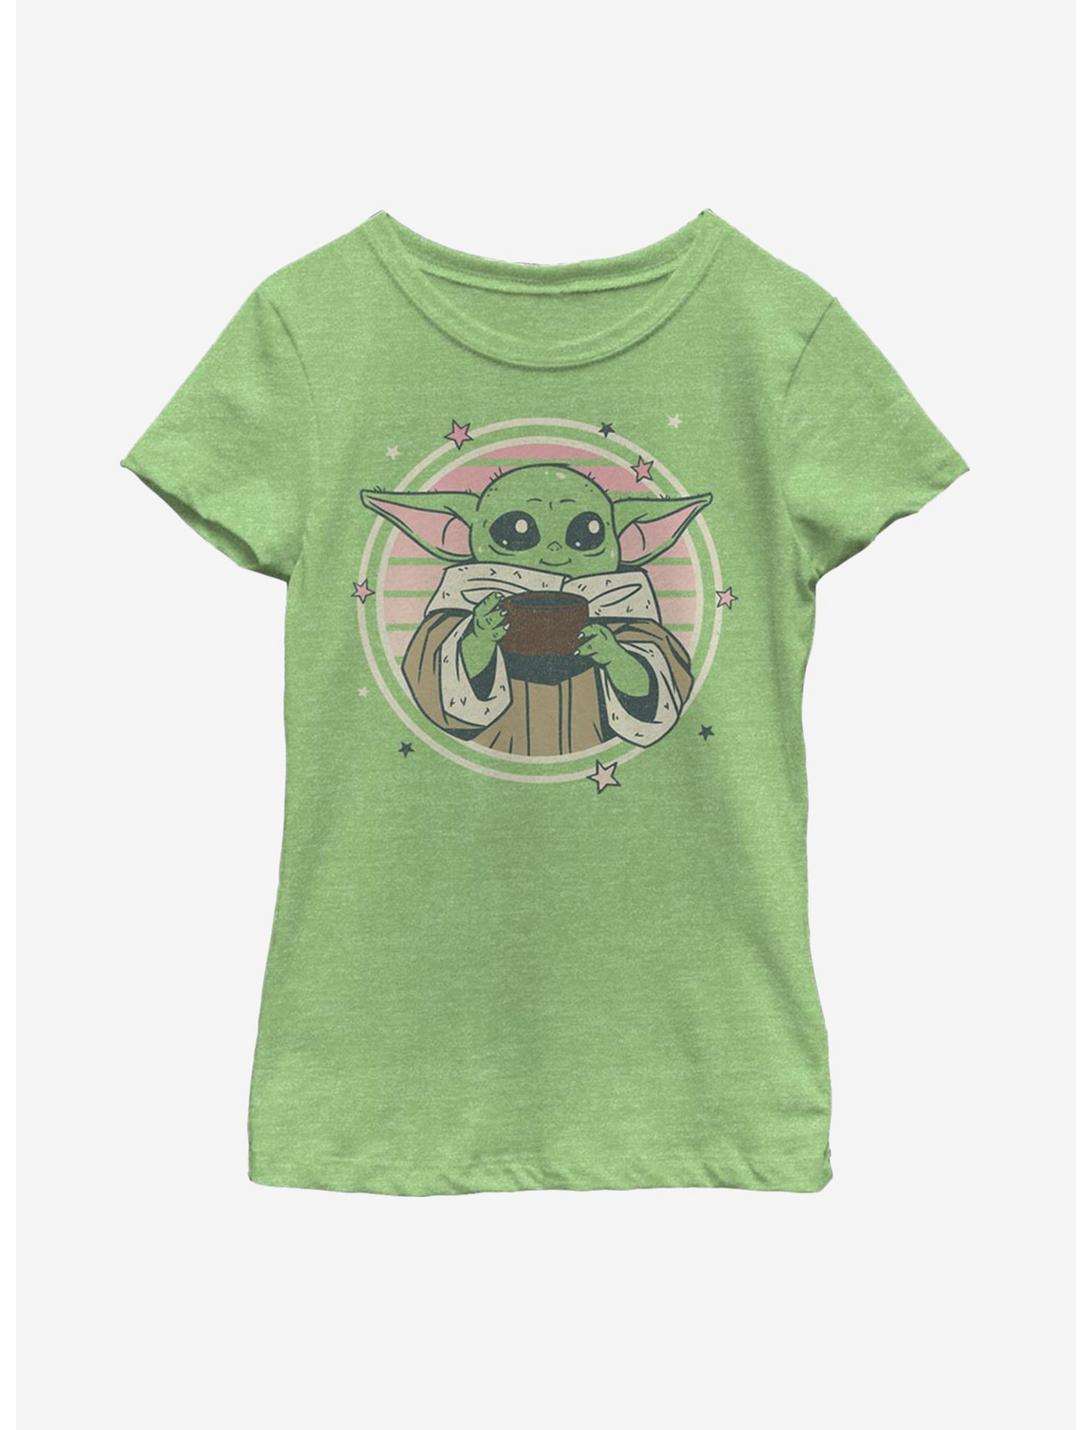 Plus Size Star Wars The Mandalorian The Child Starry Eyes Youth Girls T-Shirt, GREEN APPLE, hi-res